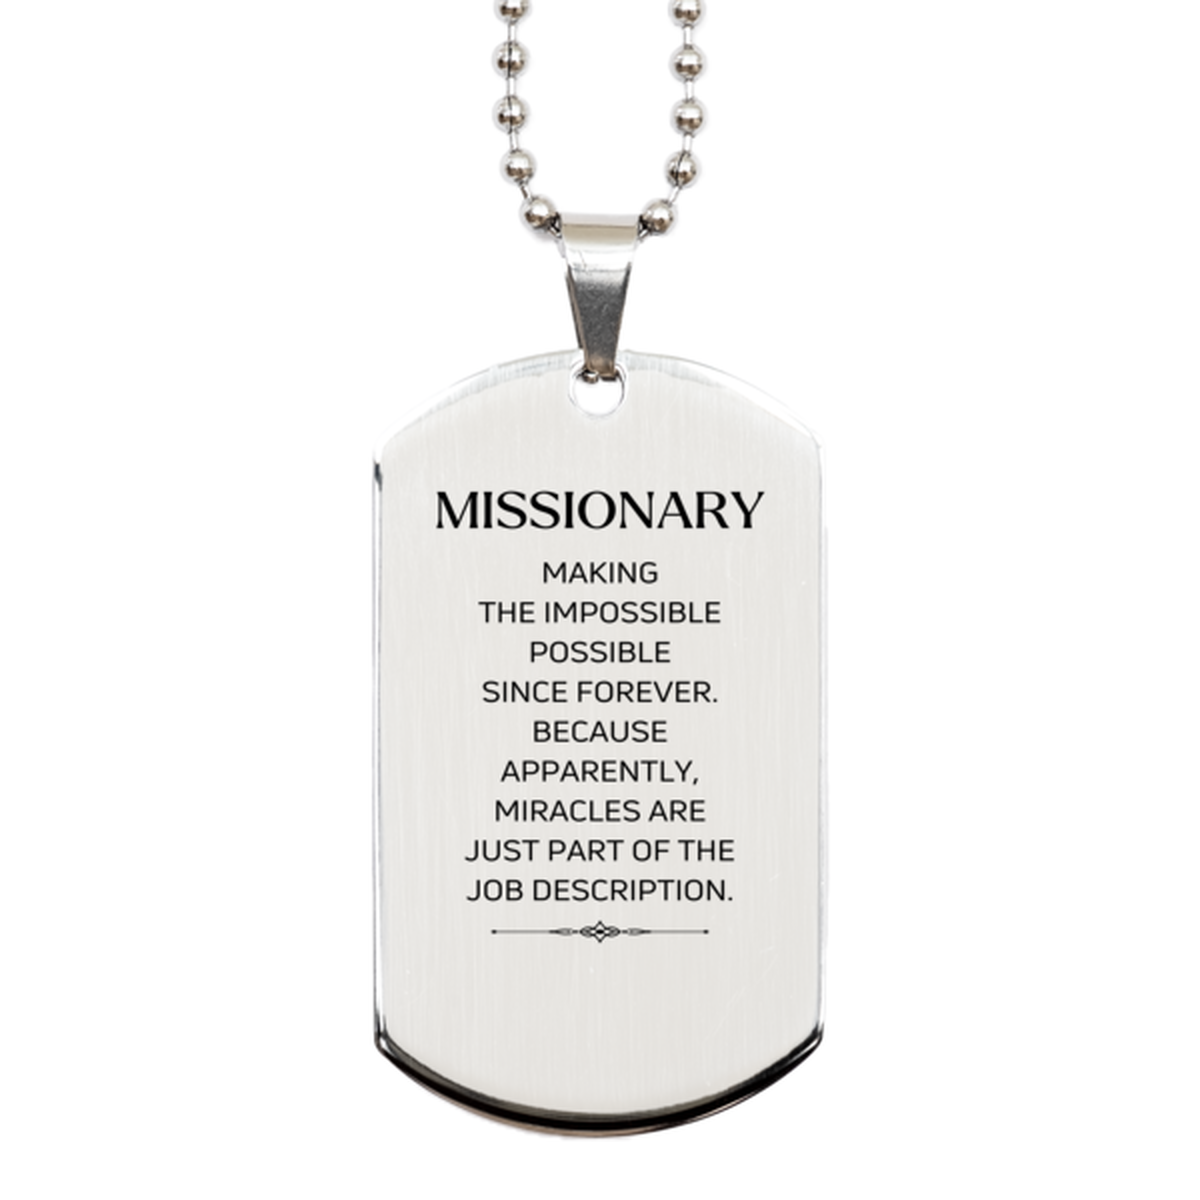 Funny Missionary Gifts, Miracles are just part of the job description, Inspirational Birthday Silver Dog Tag For Missionary, Men, Women, Coworkers, Friends, Boss